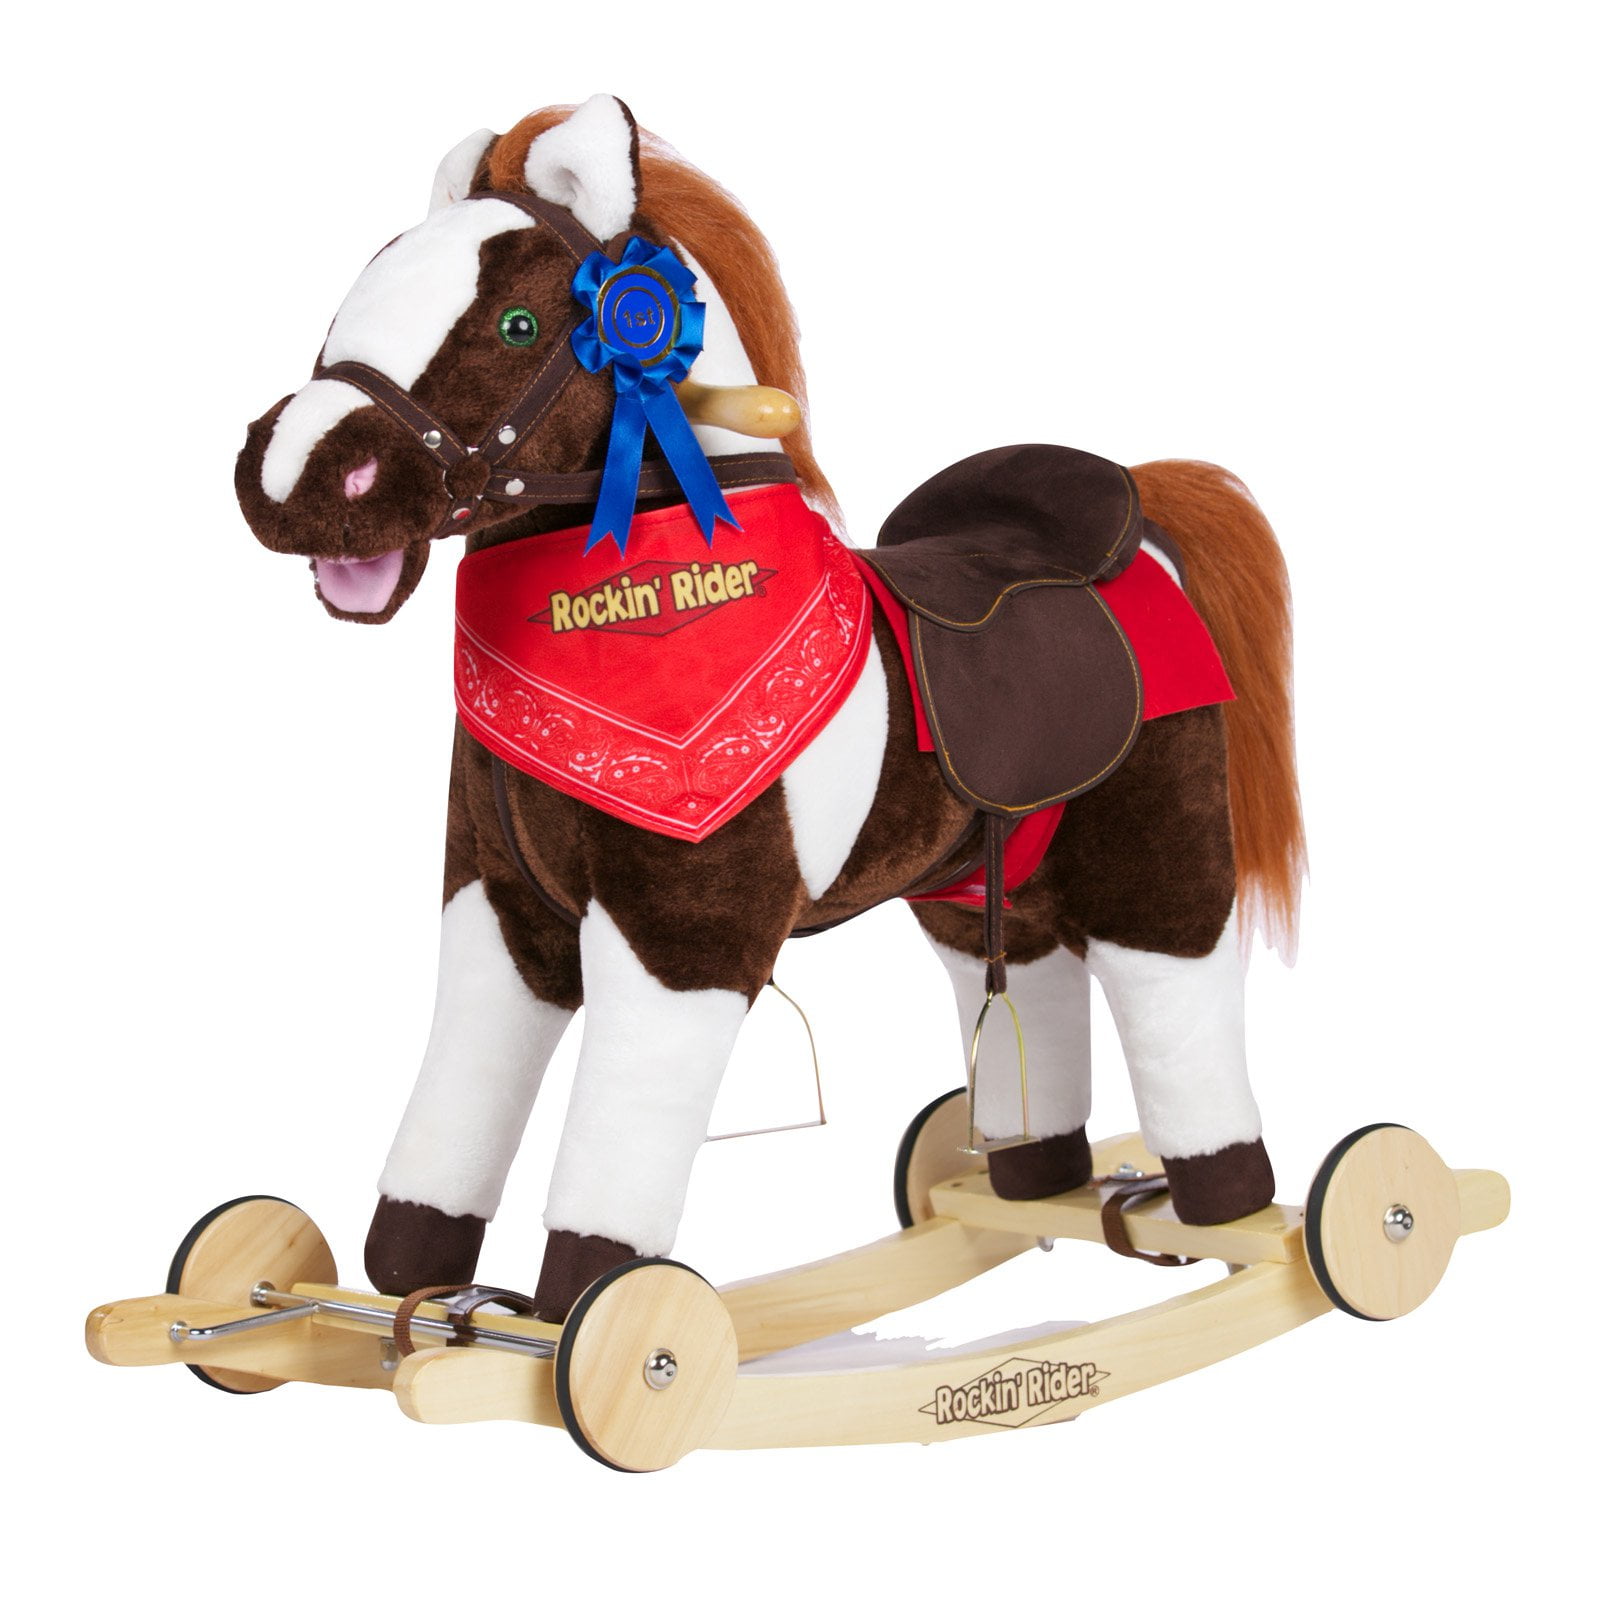 Rockin' rider charger 2-in-1 pony ride-on 